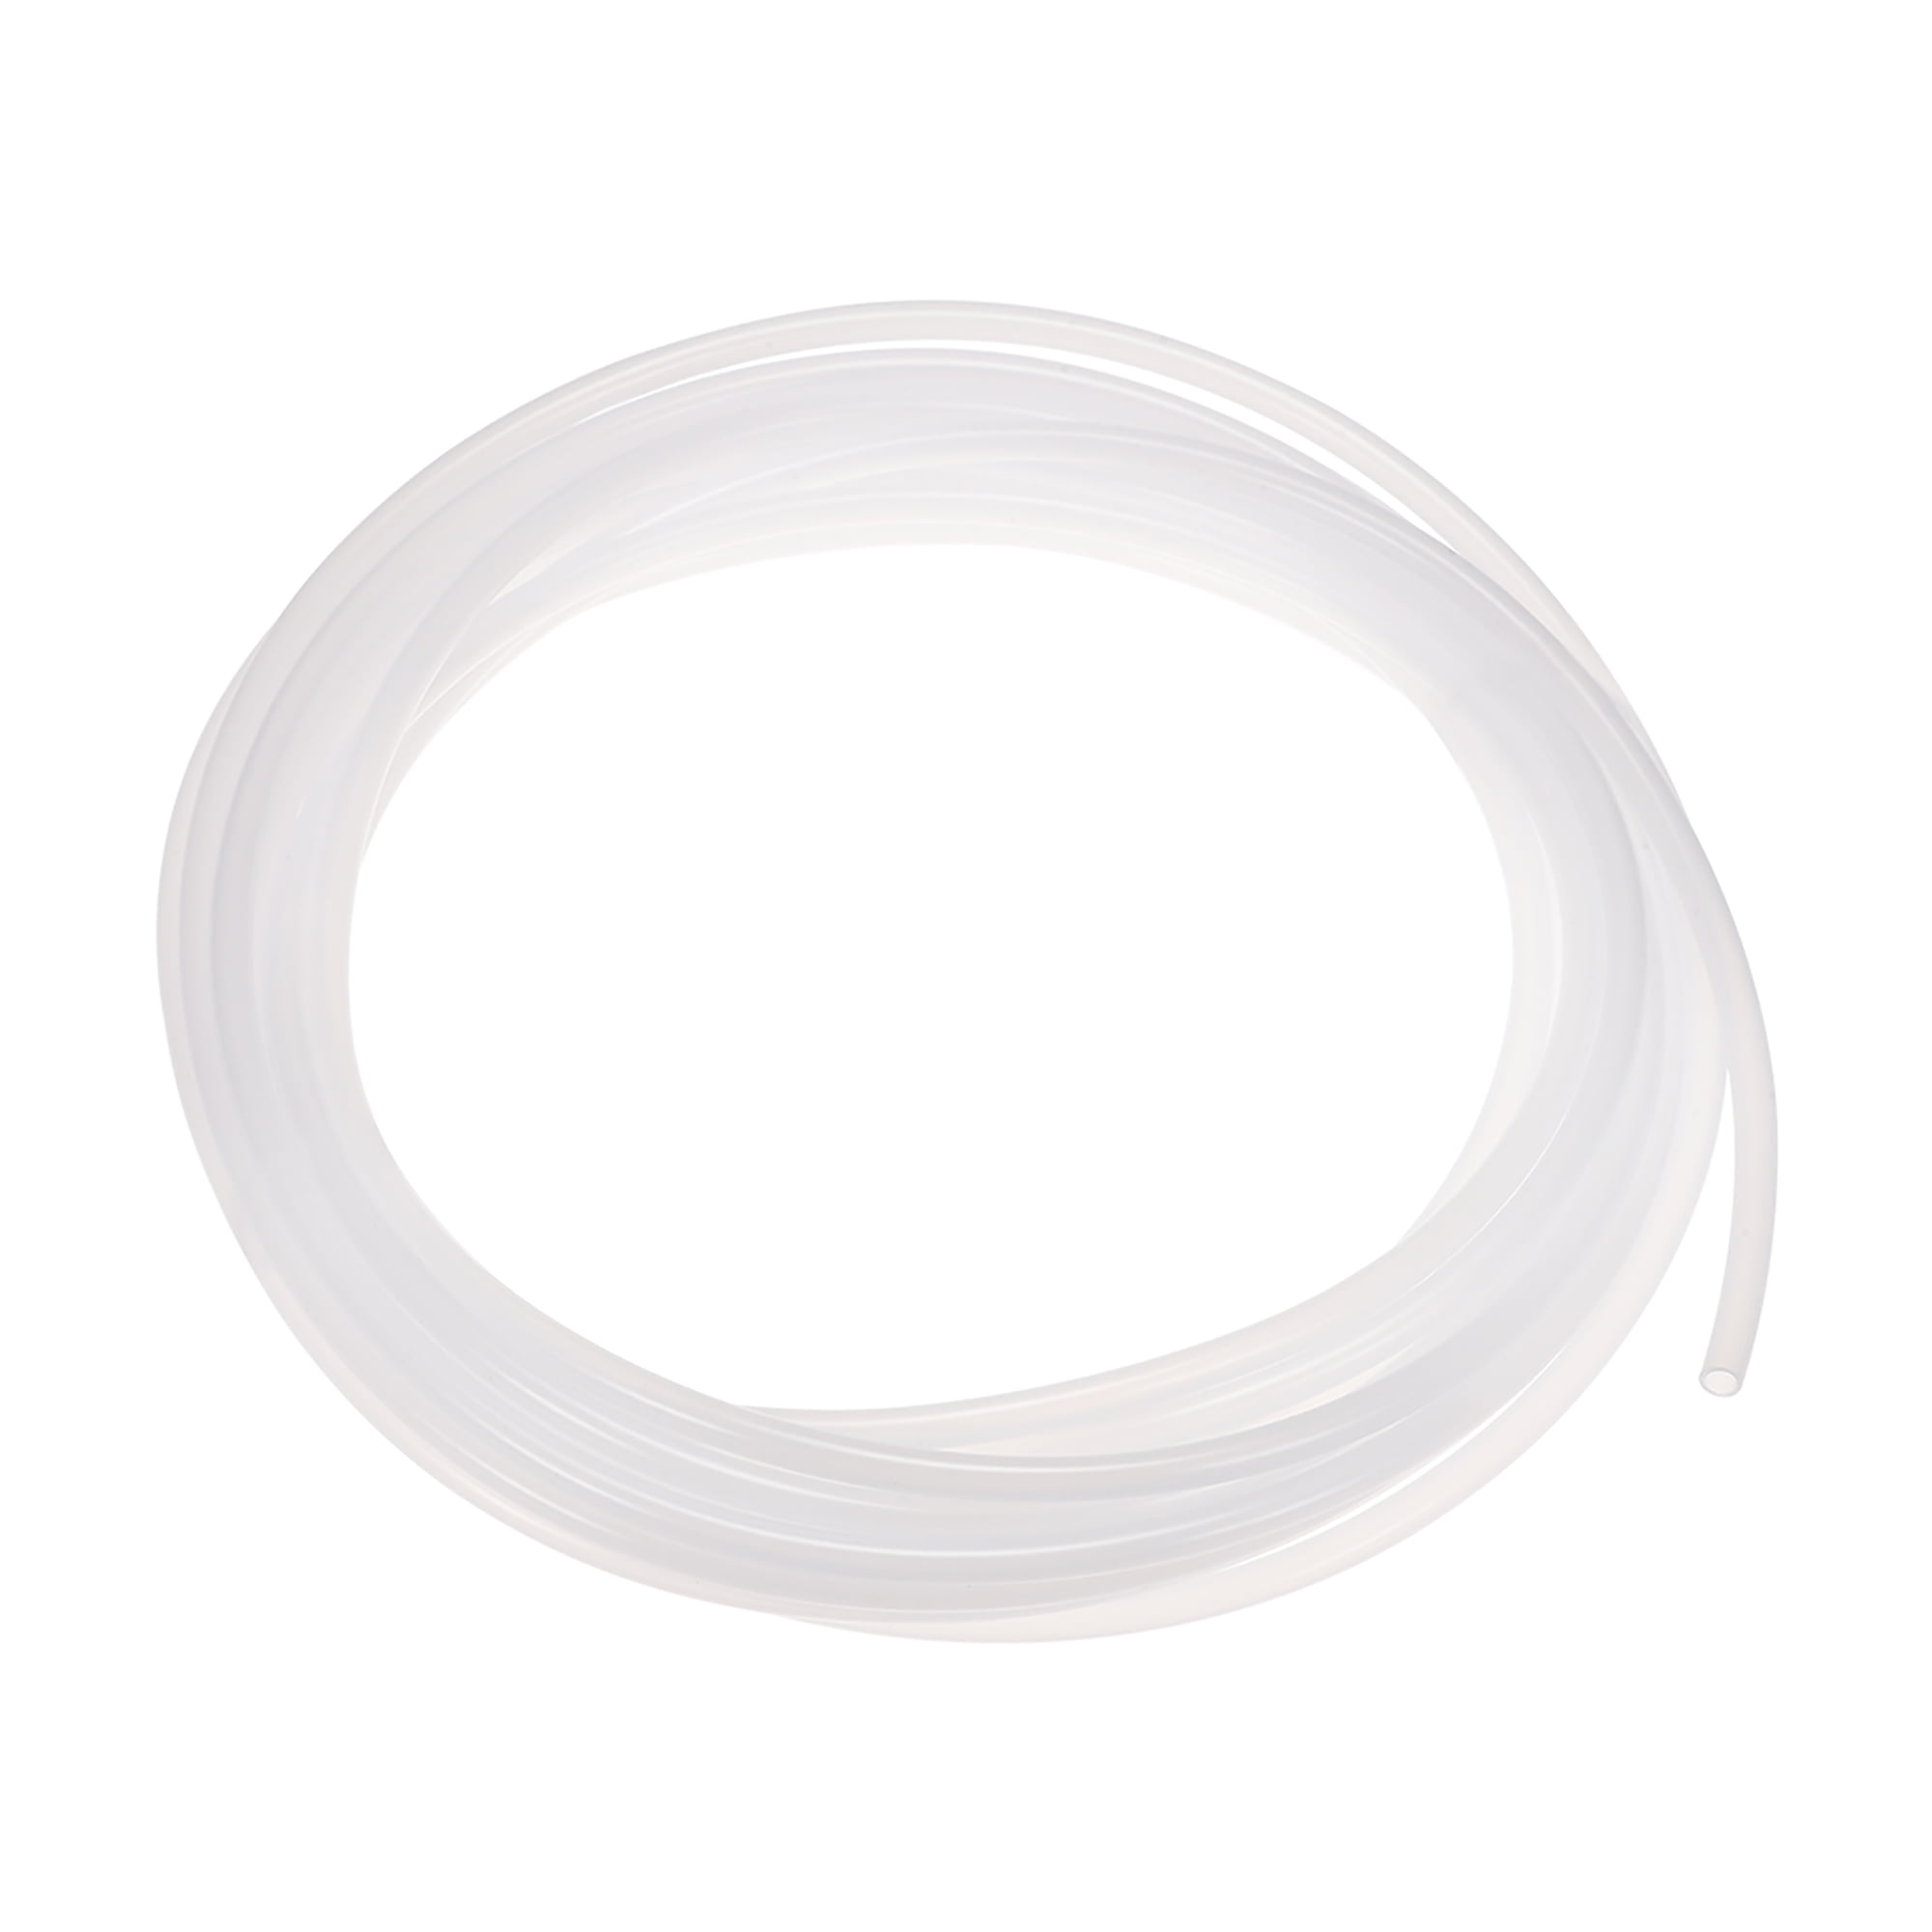 Firm Sturdy PVC Clear Tubing Food/Beverage Inner Dia 5/32" Outer Dia 9/32" 25ft